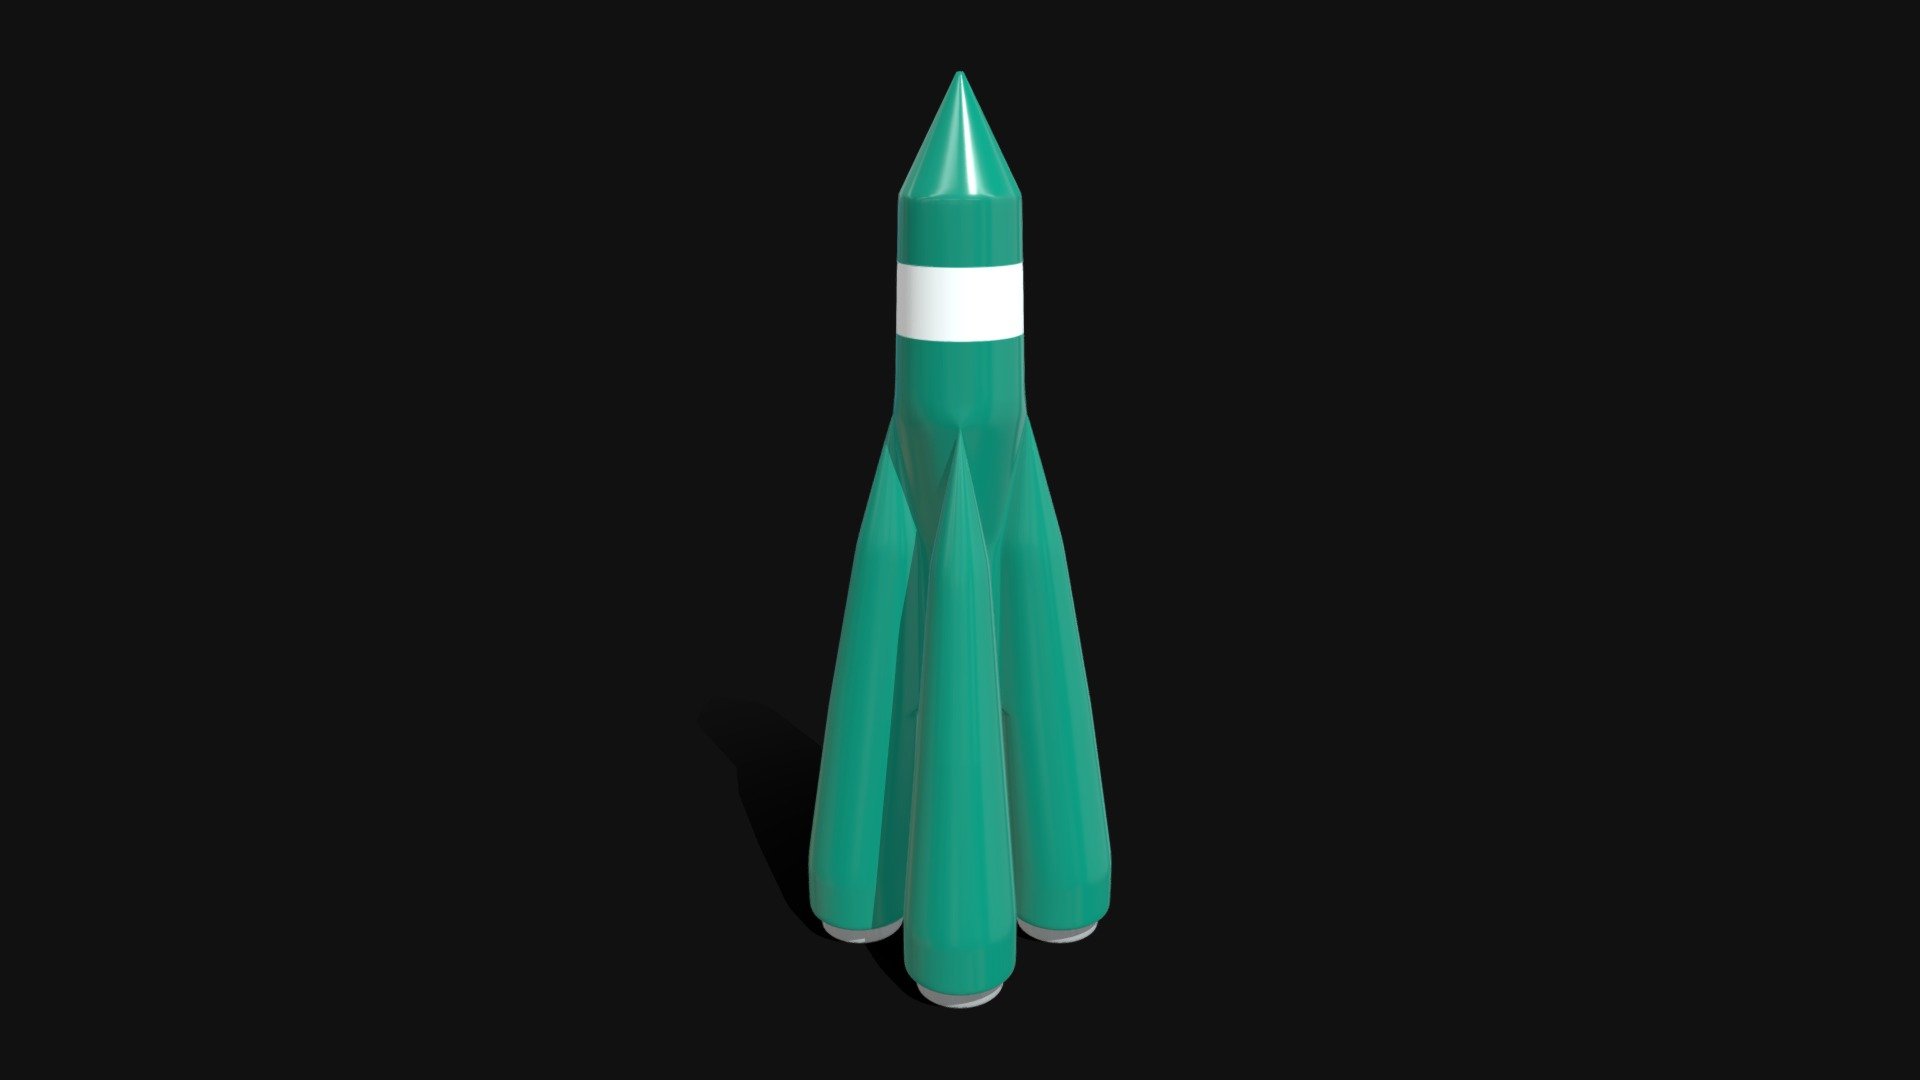 Space Rocket Low Poly Icon Style.
Only quad polygons with correct topology, supports multiple subdivisions.
Archive file contains: .c4d, .fbx, .obj, .mtl, .stl + textures.

! For better results please use subdivision surface without UV smoothing ! - Space Rocket 7 - 3D model by Andrey Sannikov (@ritordp) 3d model